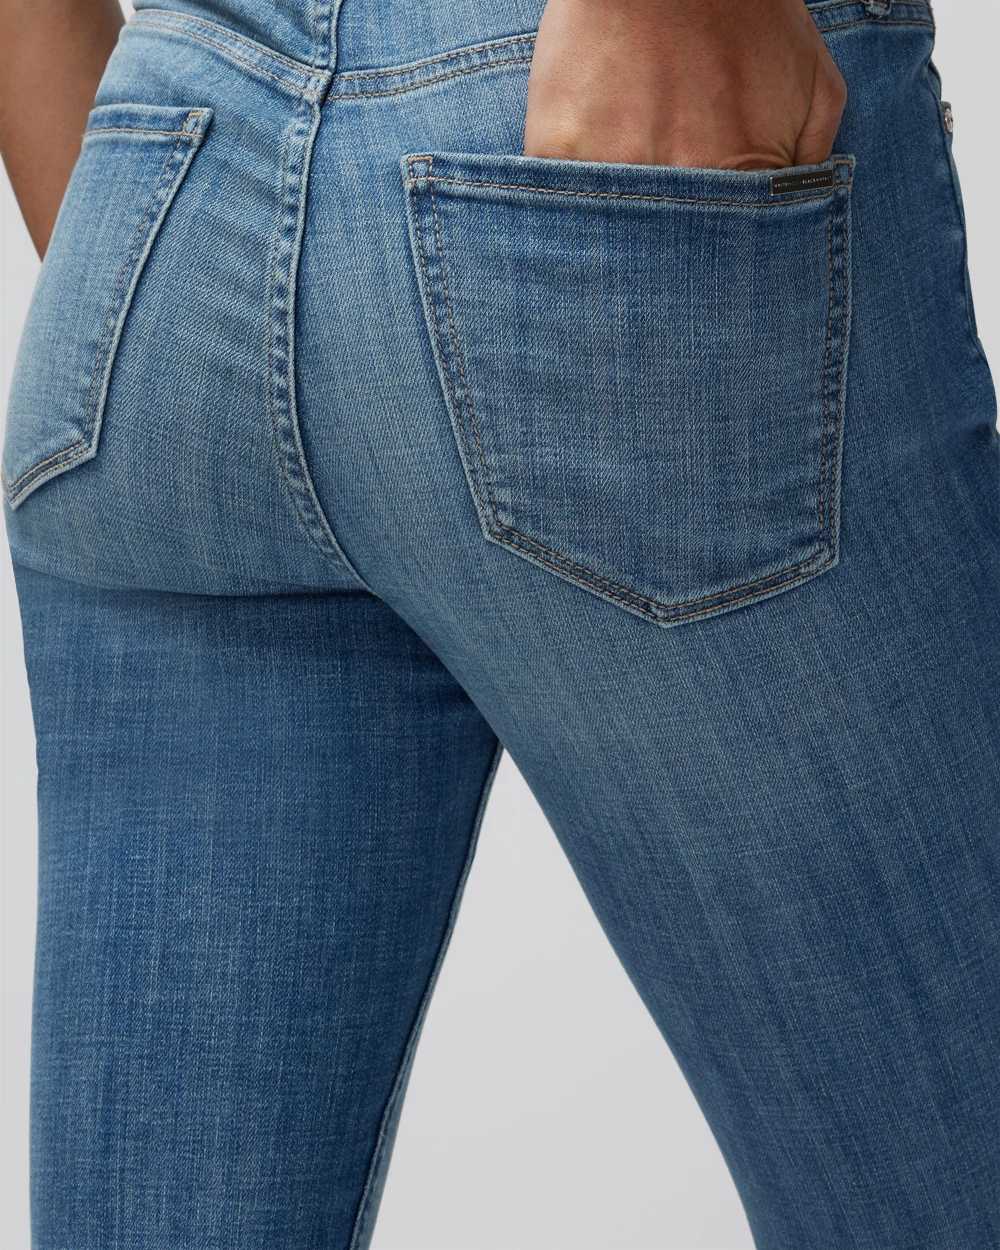 Extra High-Rise Everyday Soft Denim  Skinny Ankle Jeans click to view larger image.